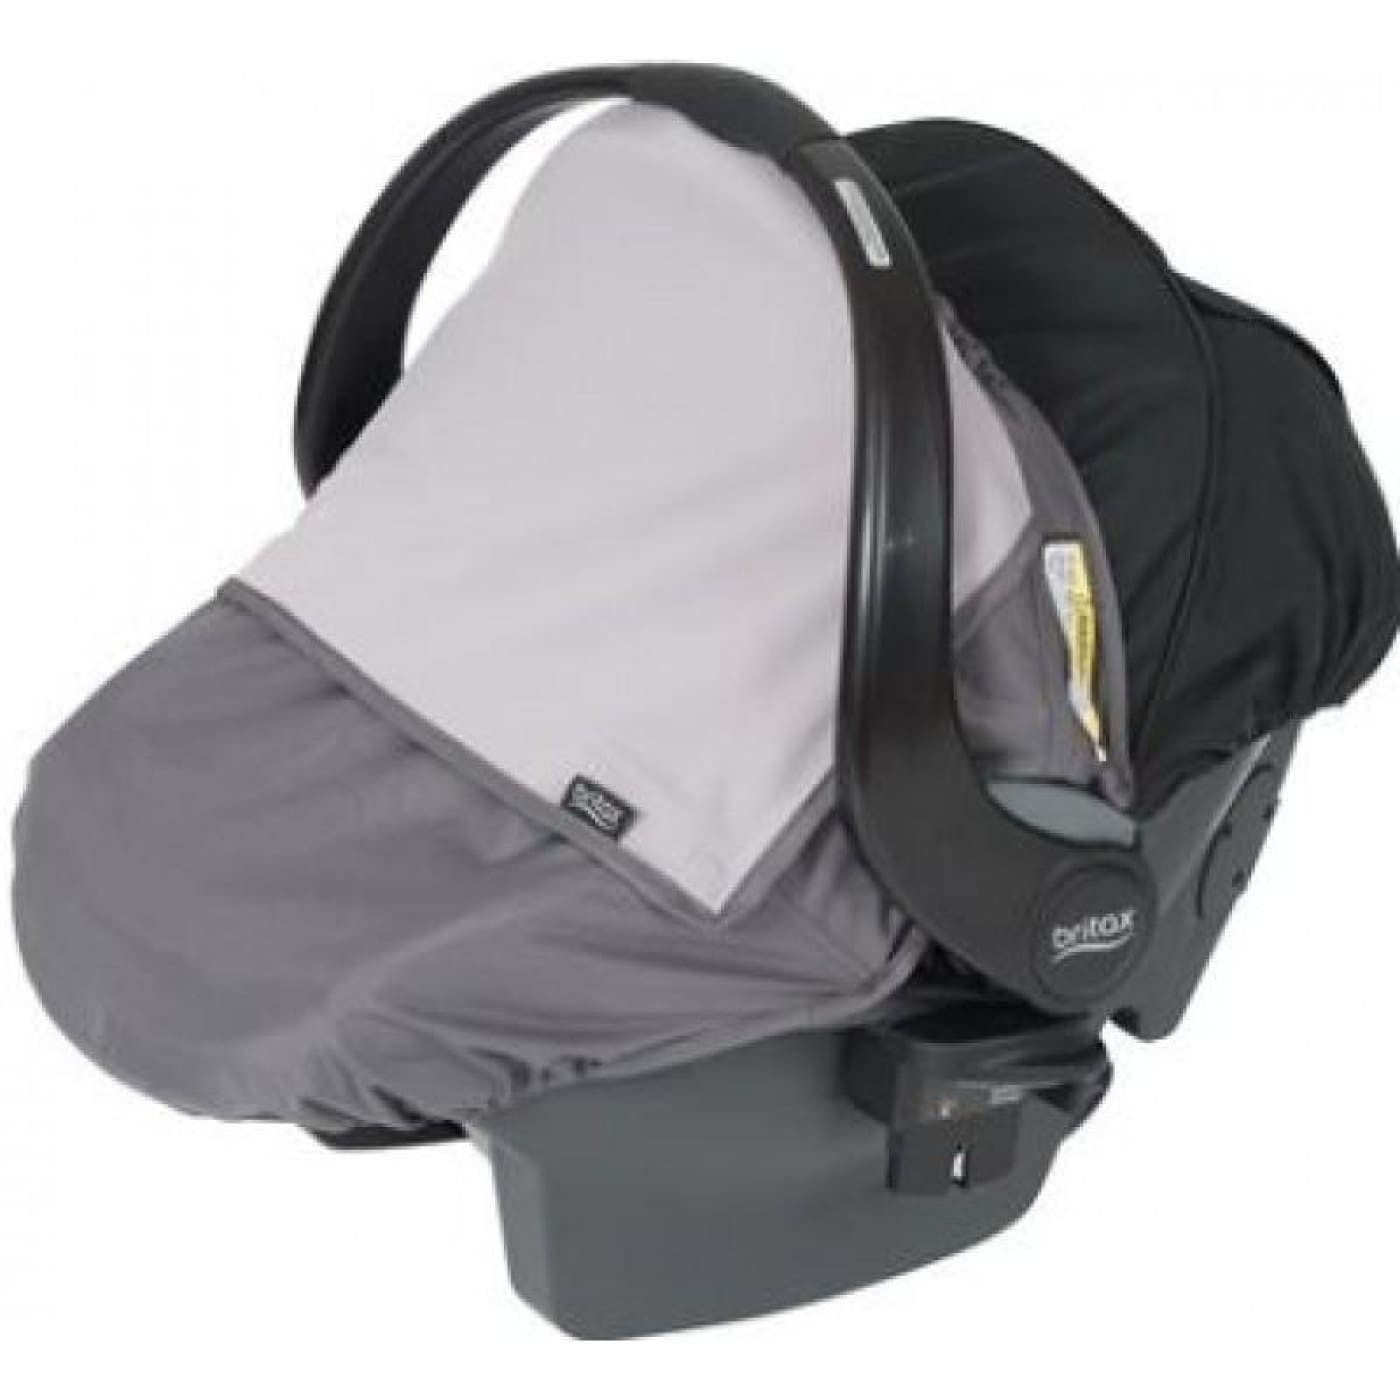 Britax Infant Carrier Shade Cover for Steelcraft/Unity - CAR SEATS - SUNSHADES/WEATHERSHIELDS